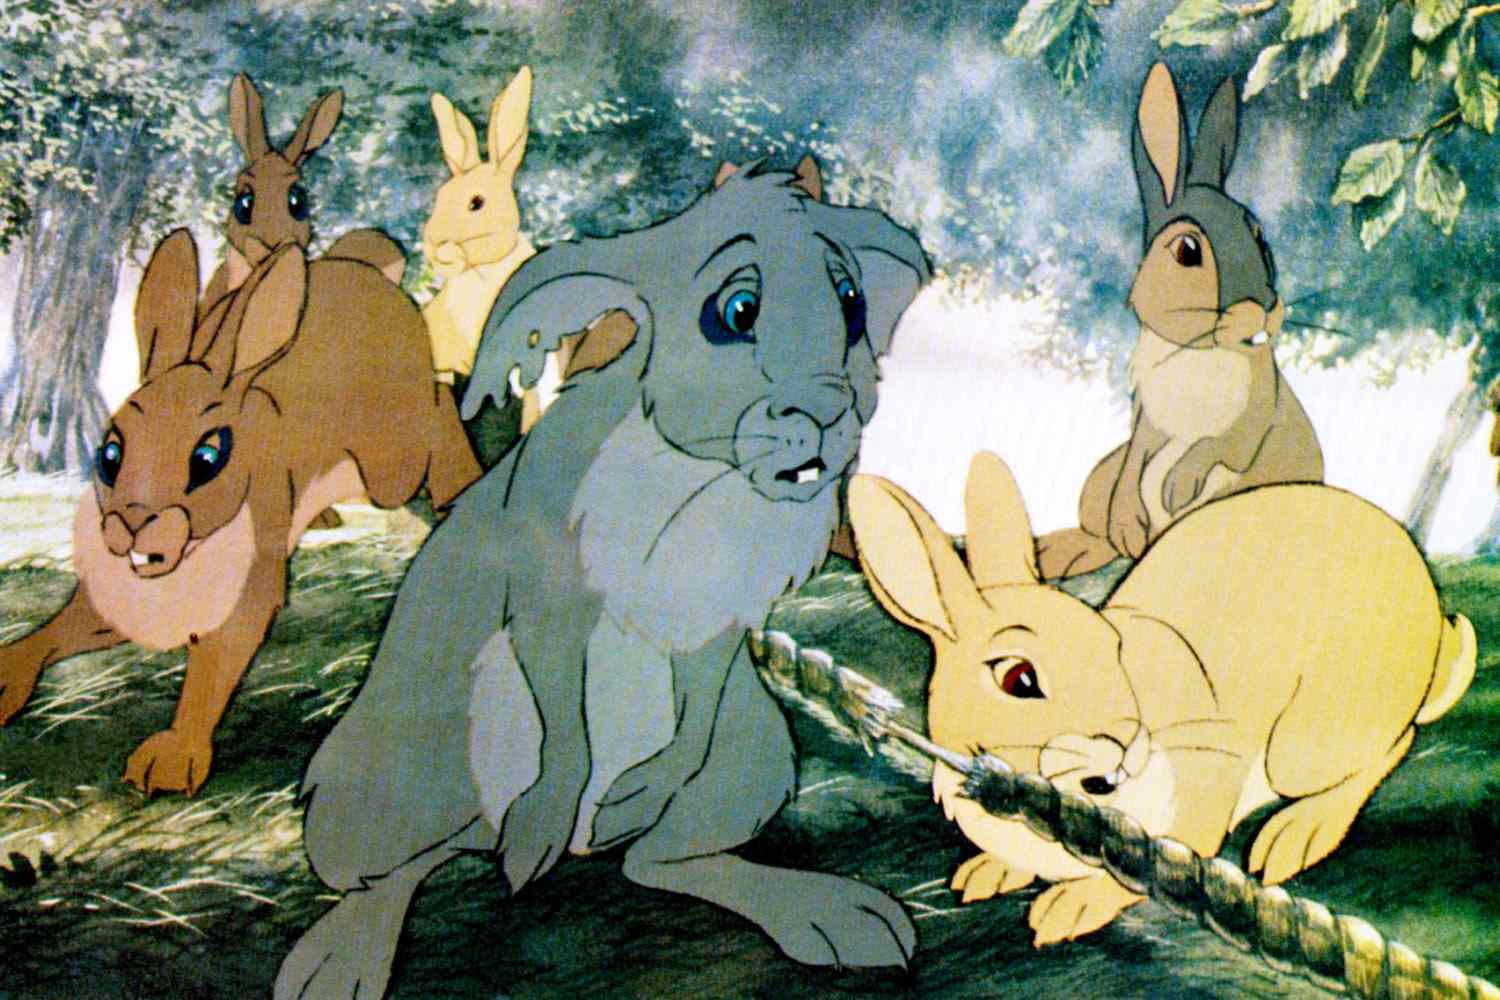 WATERSHIP DOWN, 1978, &copy; Avco Embassy/courtesy Everett Collection